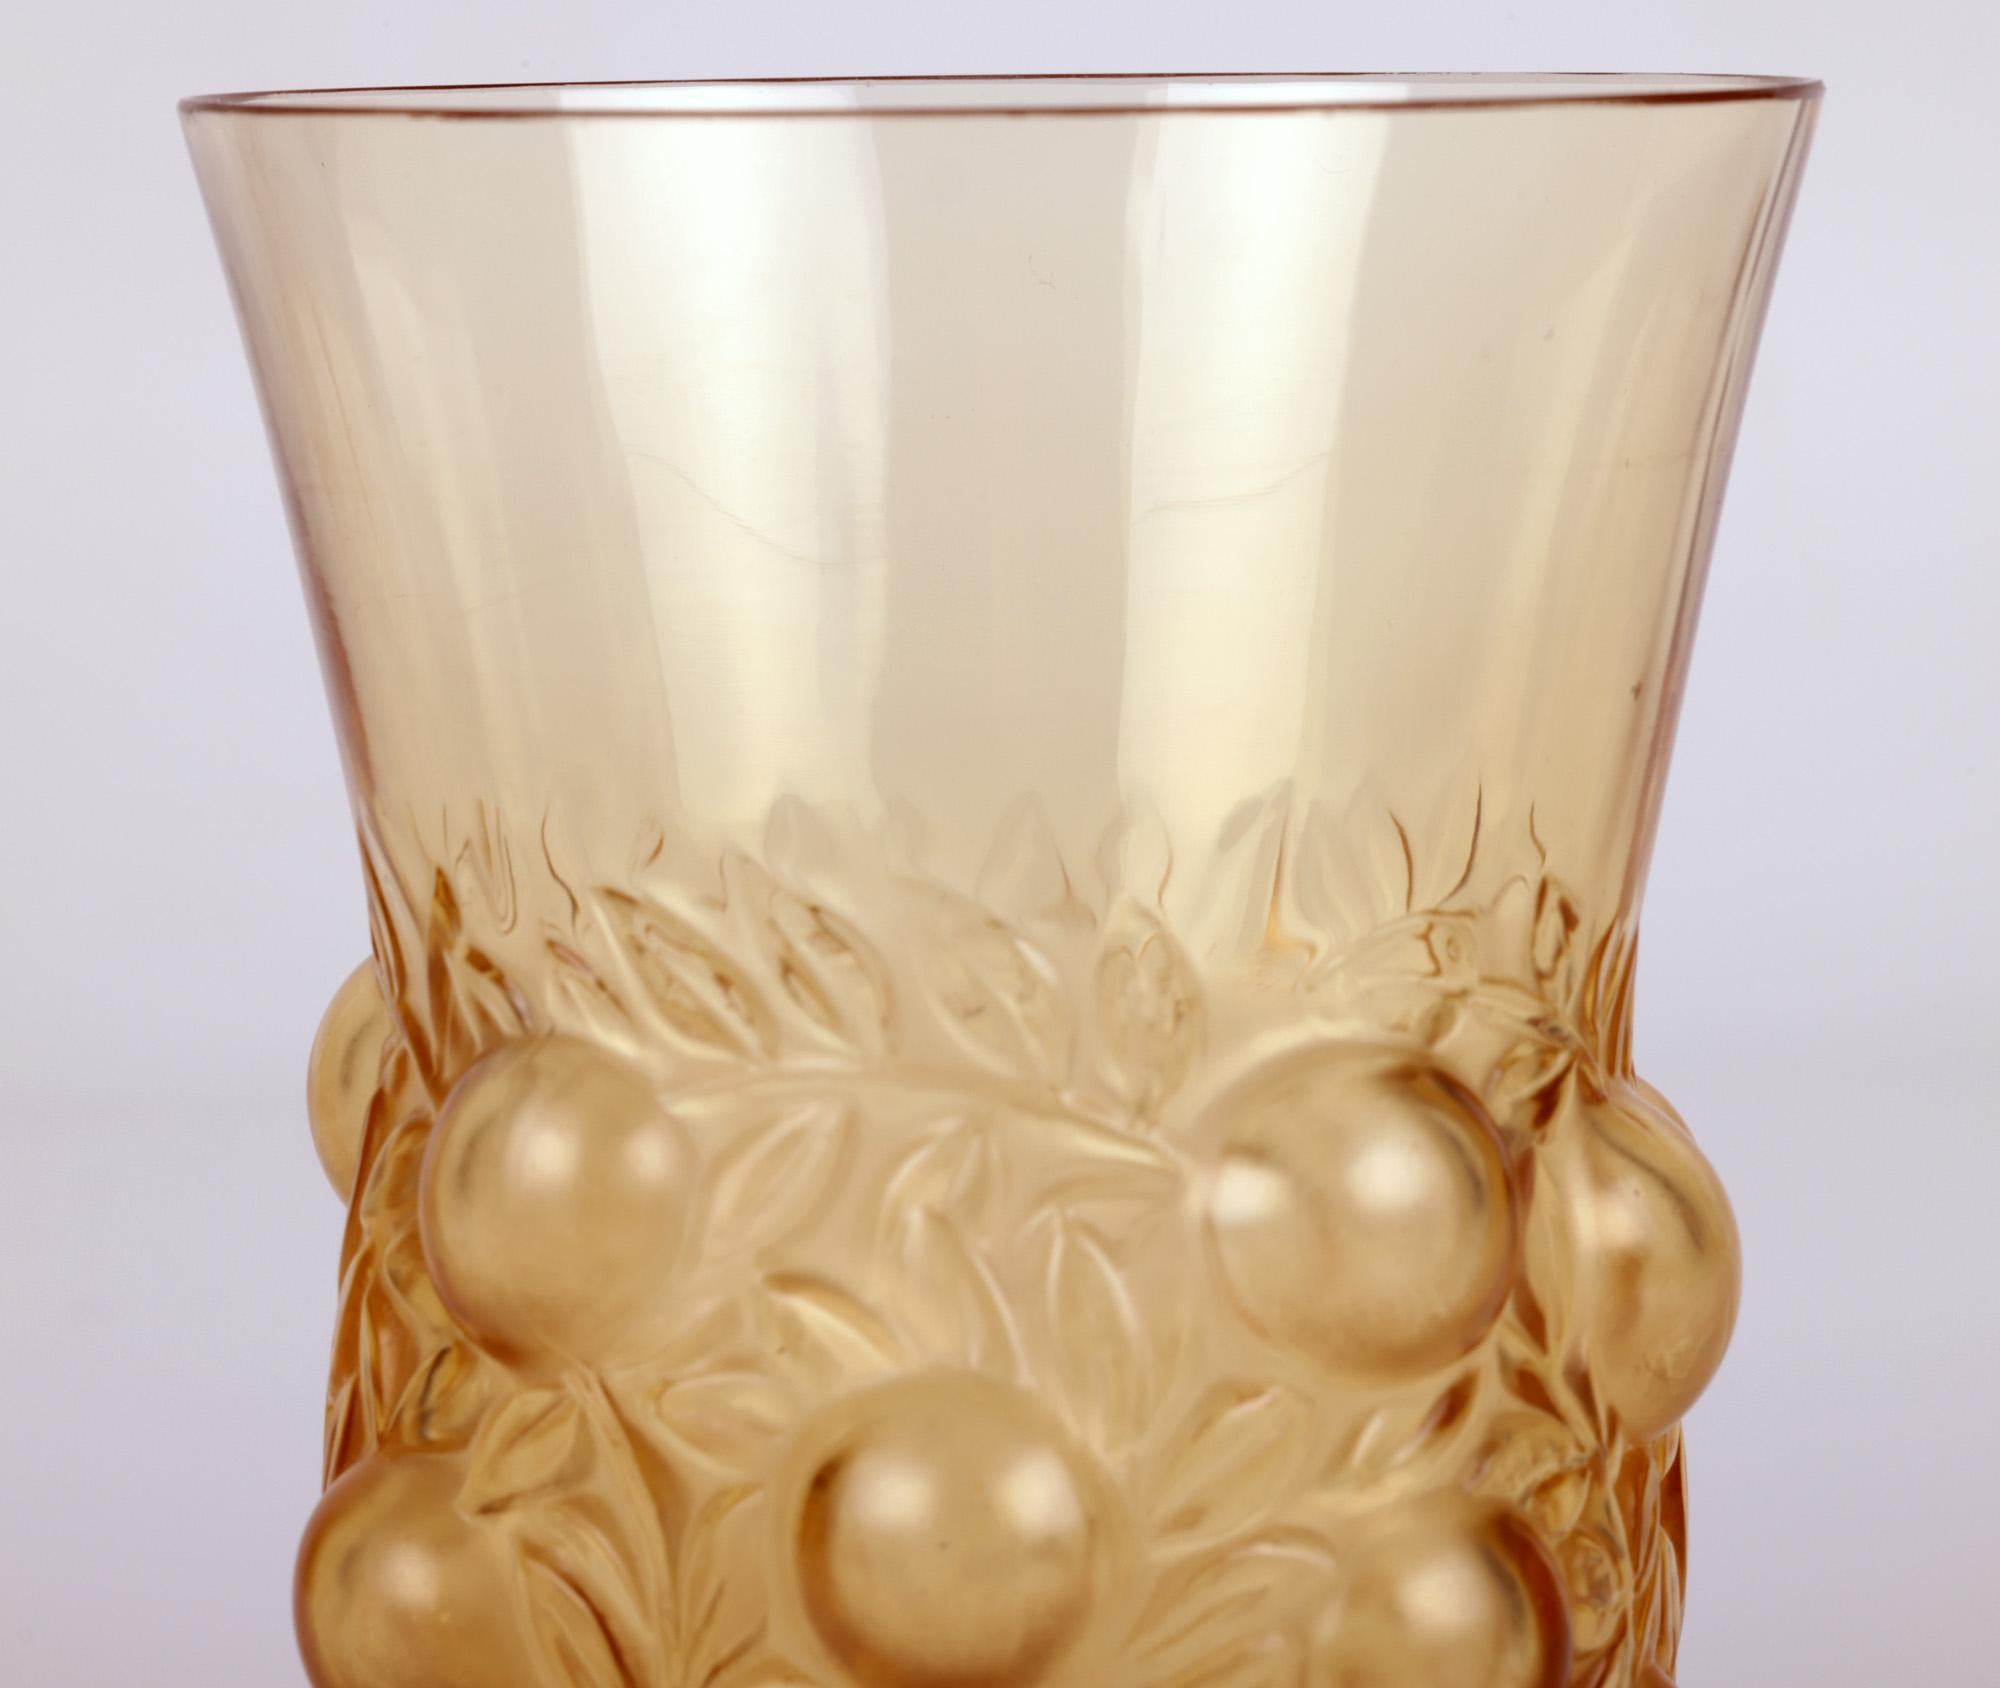 A stunning French amber glass beaker in the Setubal design by world renowned jeweller, medallist and glass designer René Jules Lalique (French, 1860-1945) and dating from around 1931. This finely made example is molded in very thin amber colored